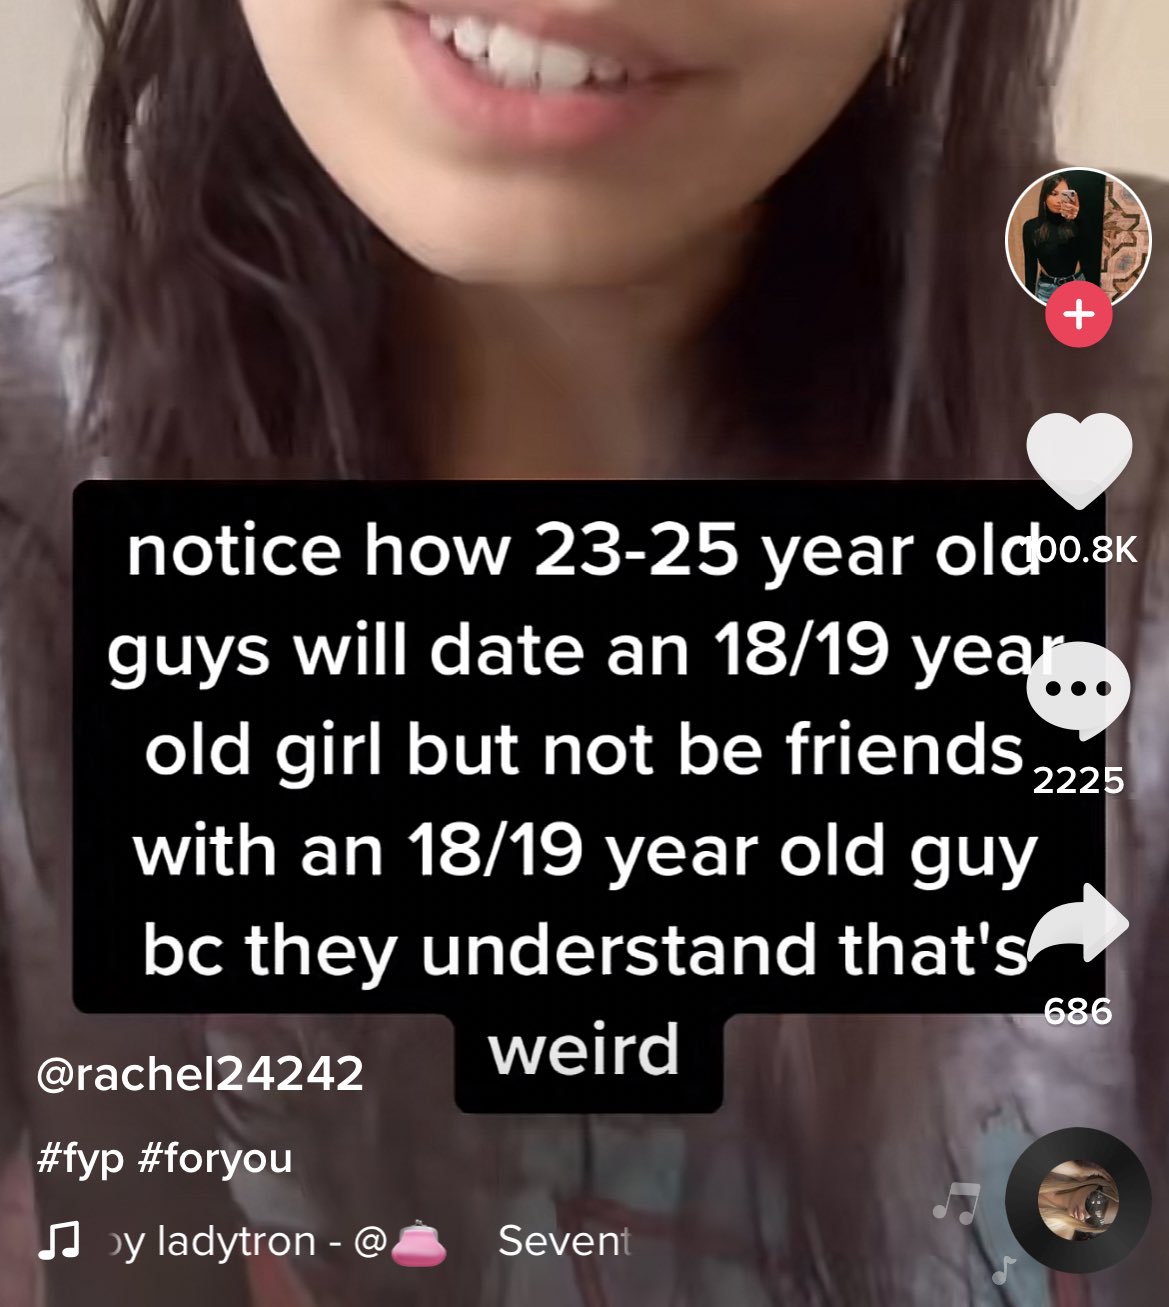 Can a 25 year old date a 19?